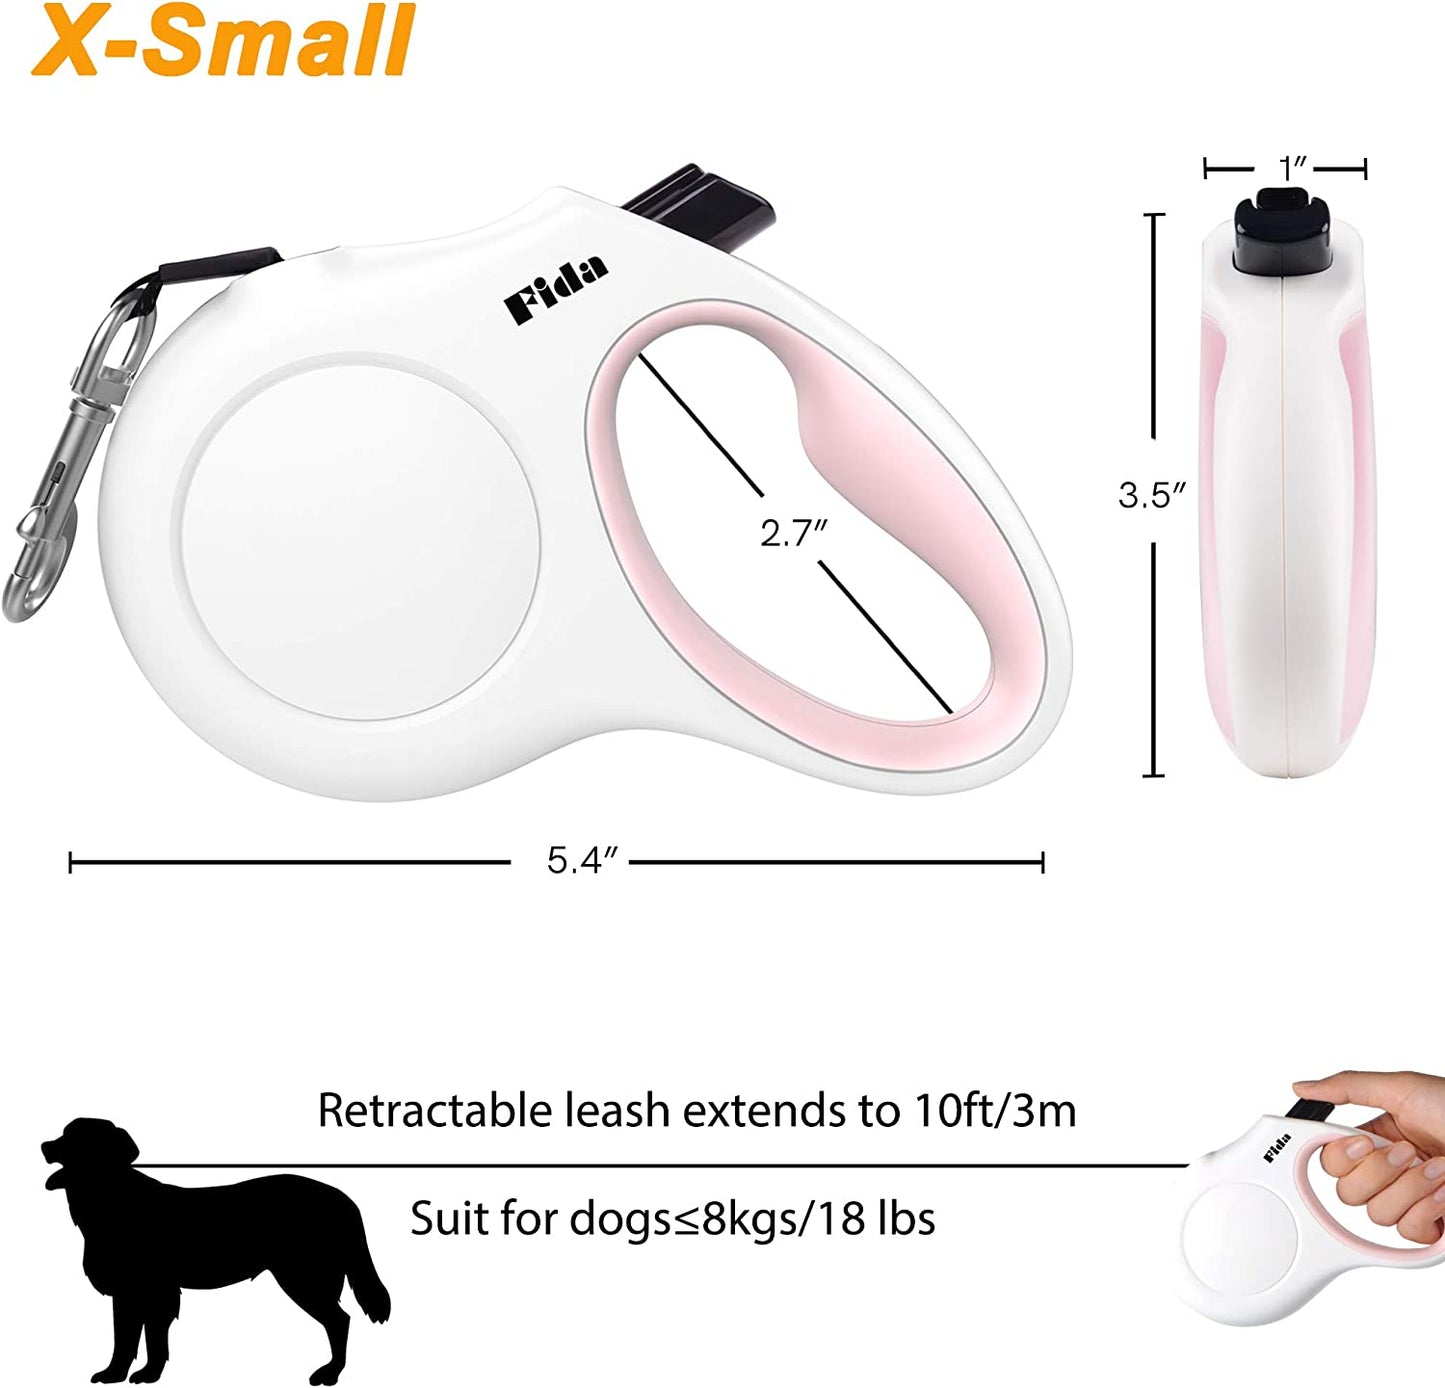 Retractable Dog Leash with Dispenser and Poop Bags, 10 Ft Pet Walking Leash for X-Small Dog or Cat up to 18 Lbs, Anti-Slip Handle, Tangle Free, Reflective Nylon Tape (XS, White)